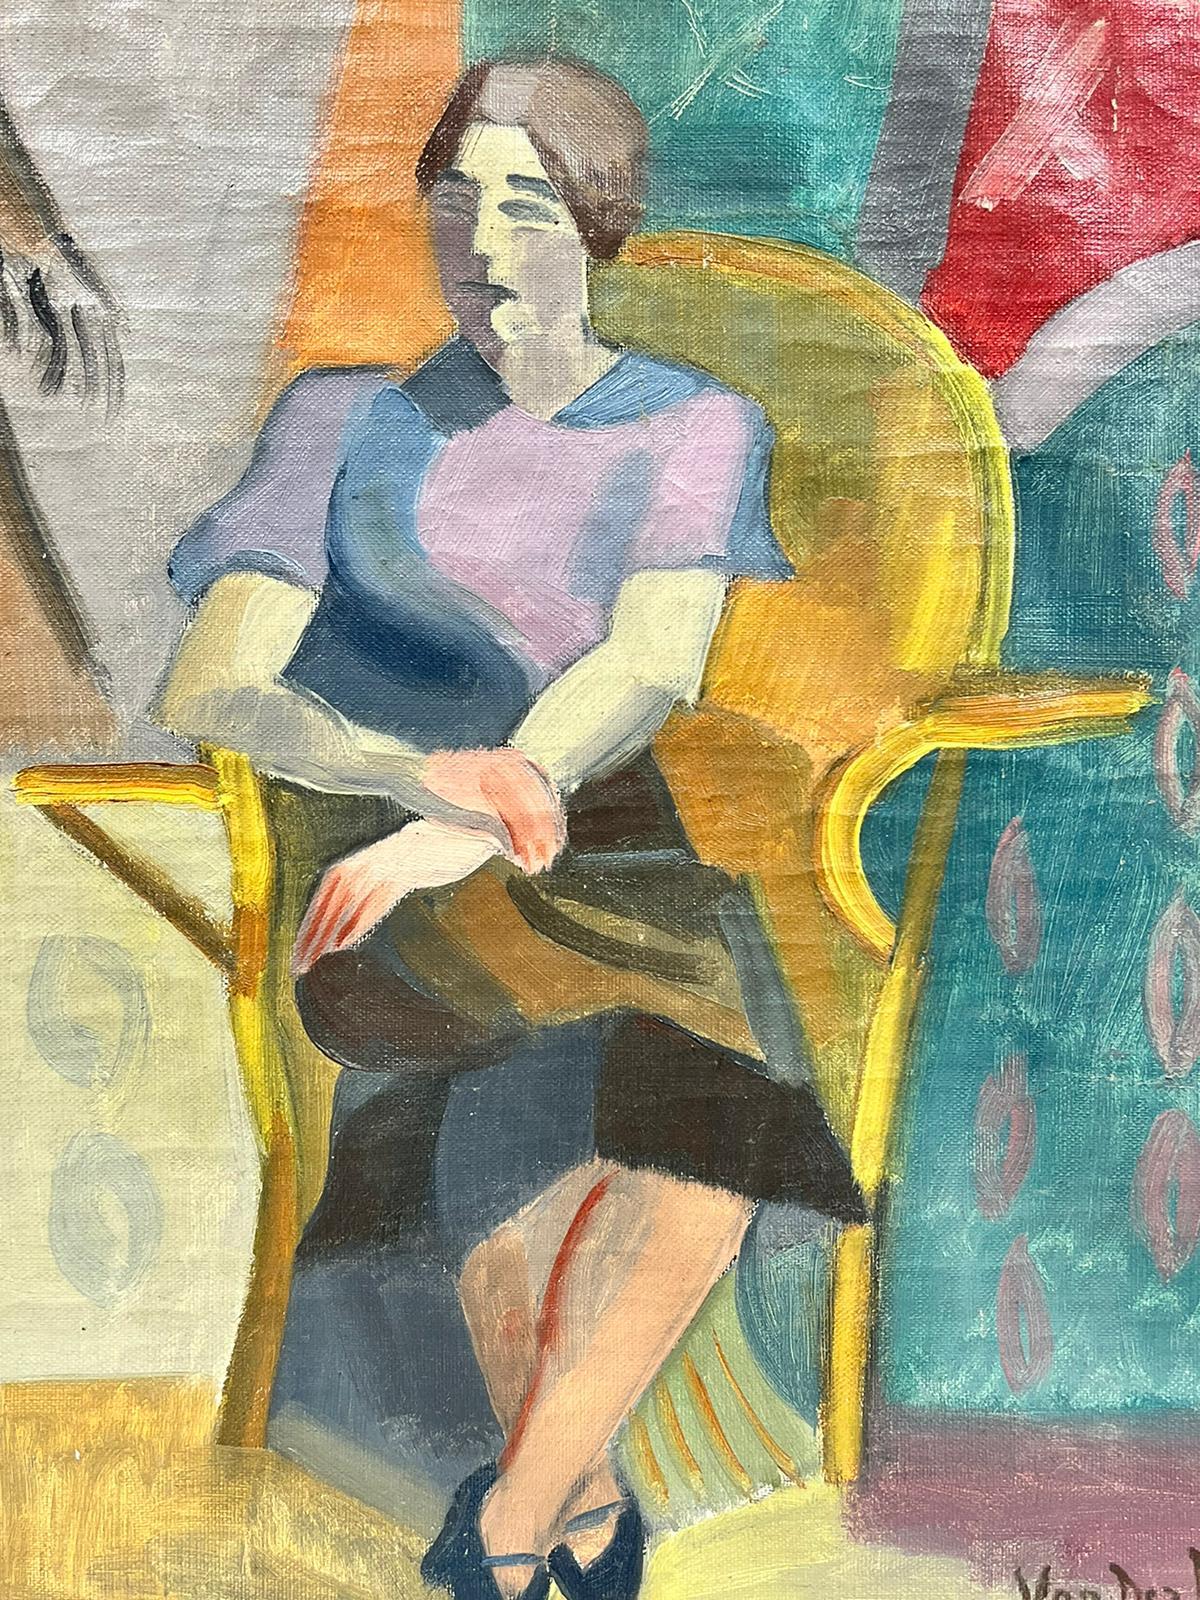 Artist/ School: by Henri Van Der Beck (French 1886-1956), signed lower right

Title: Portrait of a lady seated on a golden yellow chair within an interior. Painted in a period Cubist style, so evocative of the period. 

Medium: oil on canvas,